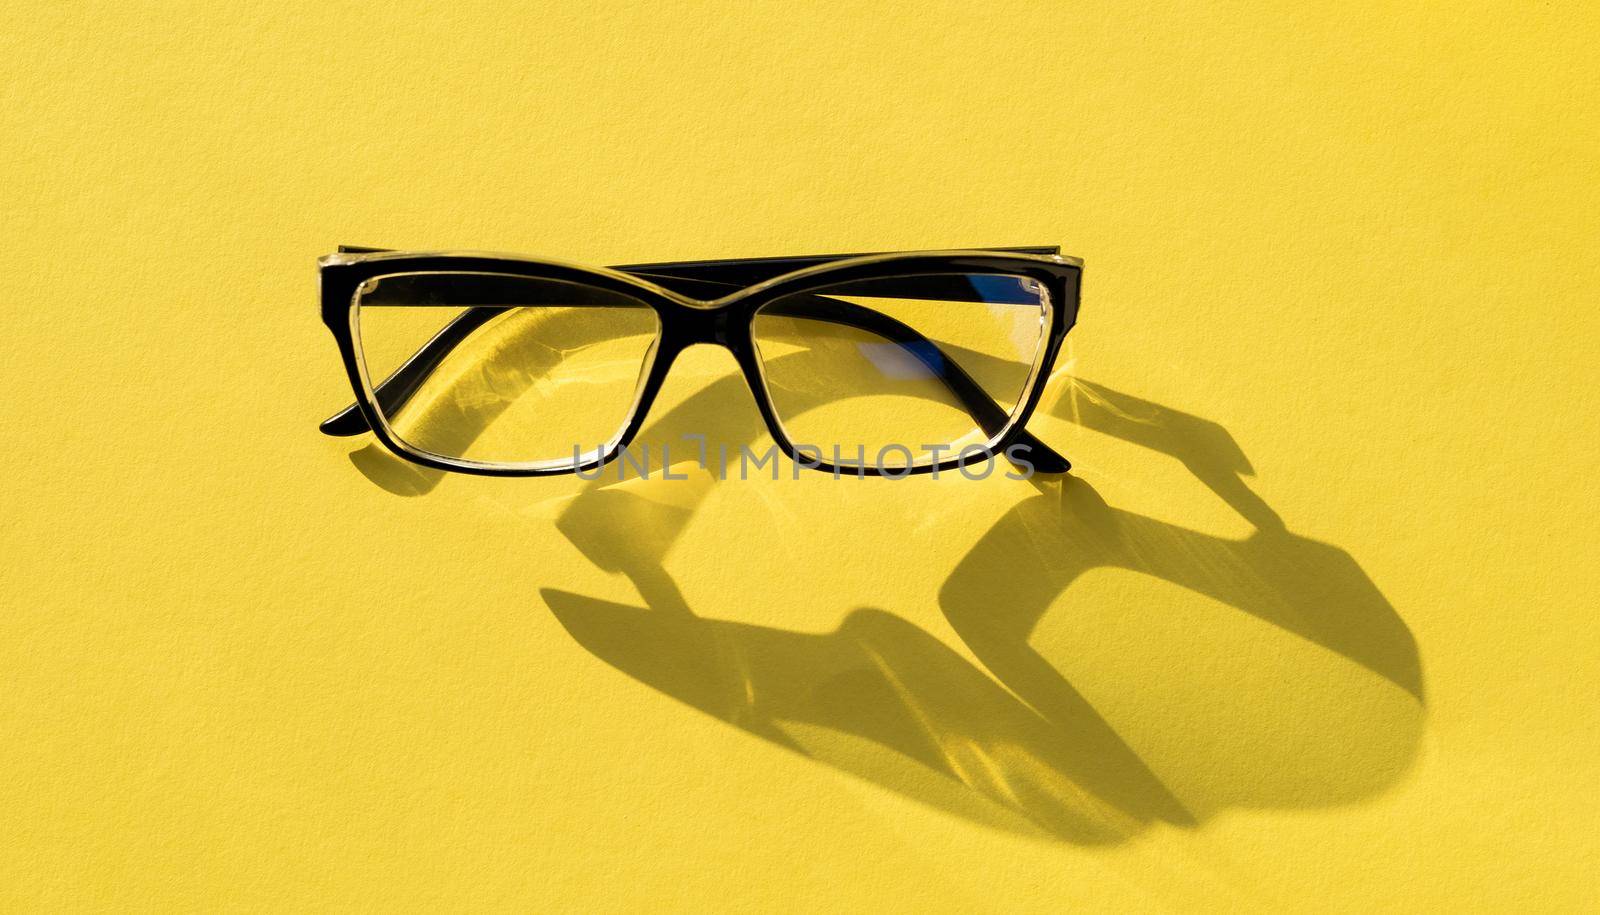 Blck glasses isolated on yellow background with copyspace. Concept of eyesight and vision. Modern optical frame googles accessory